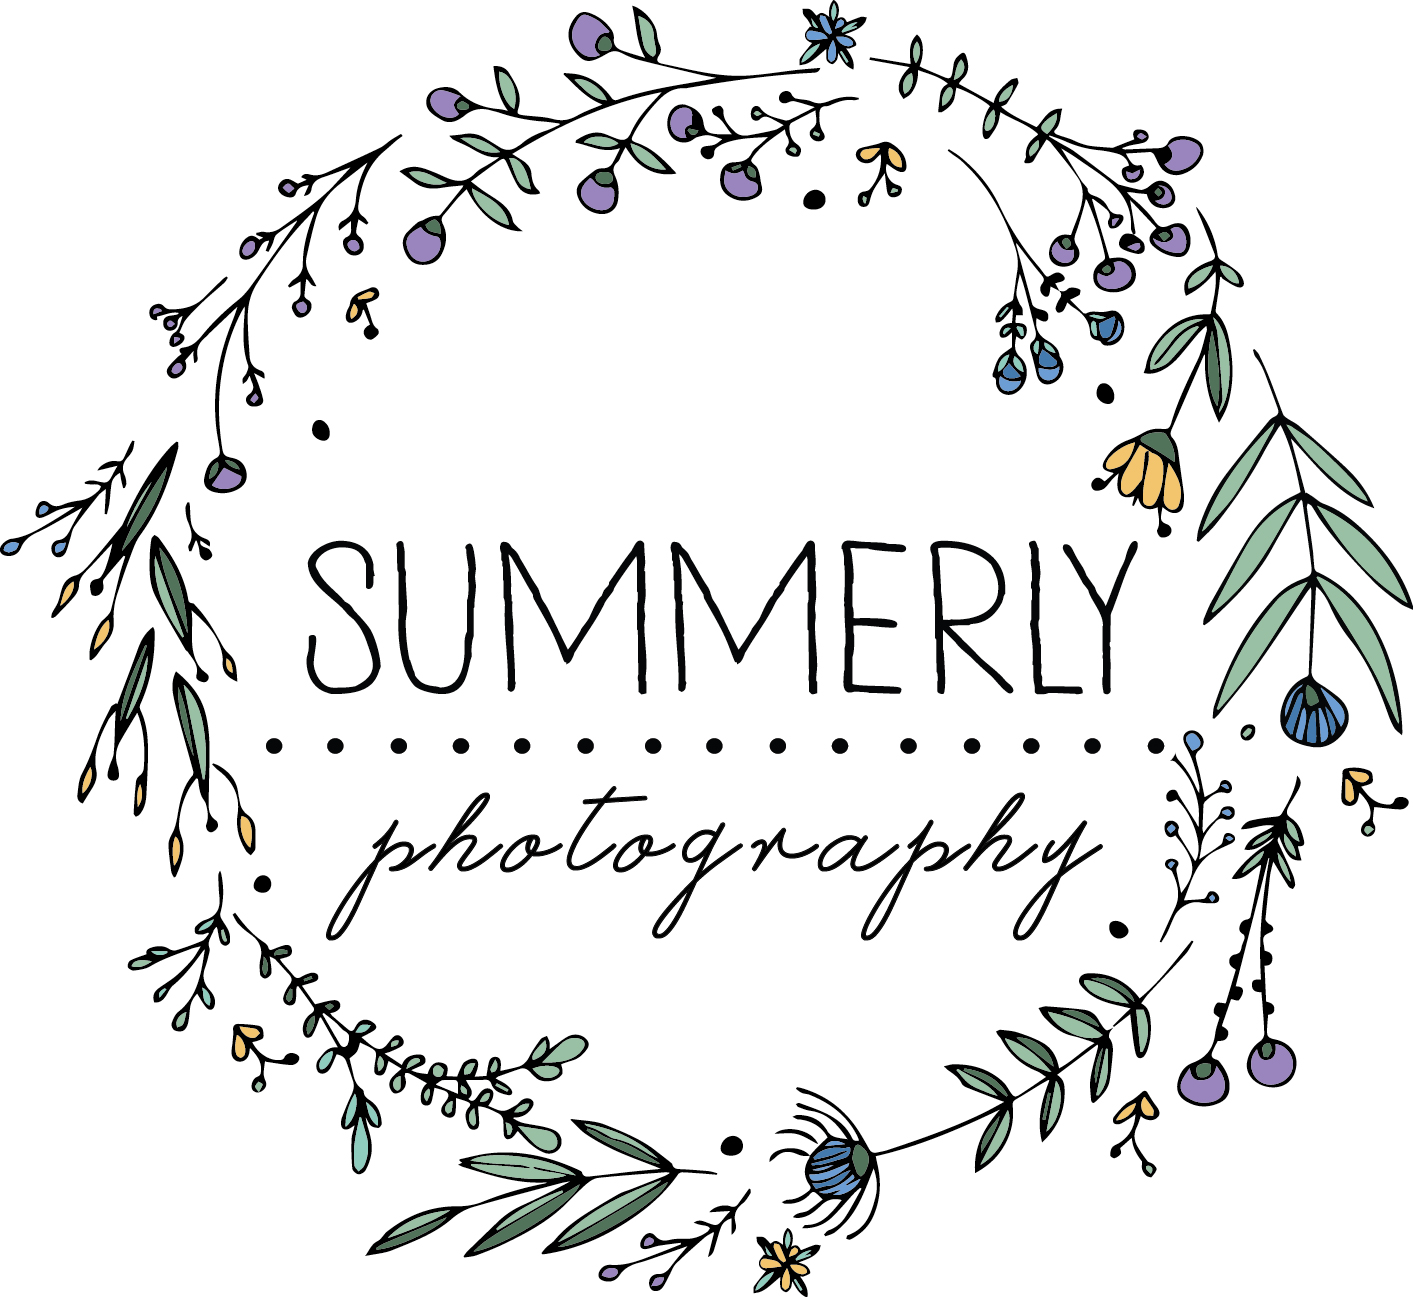 Summerly photography